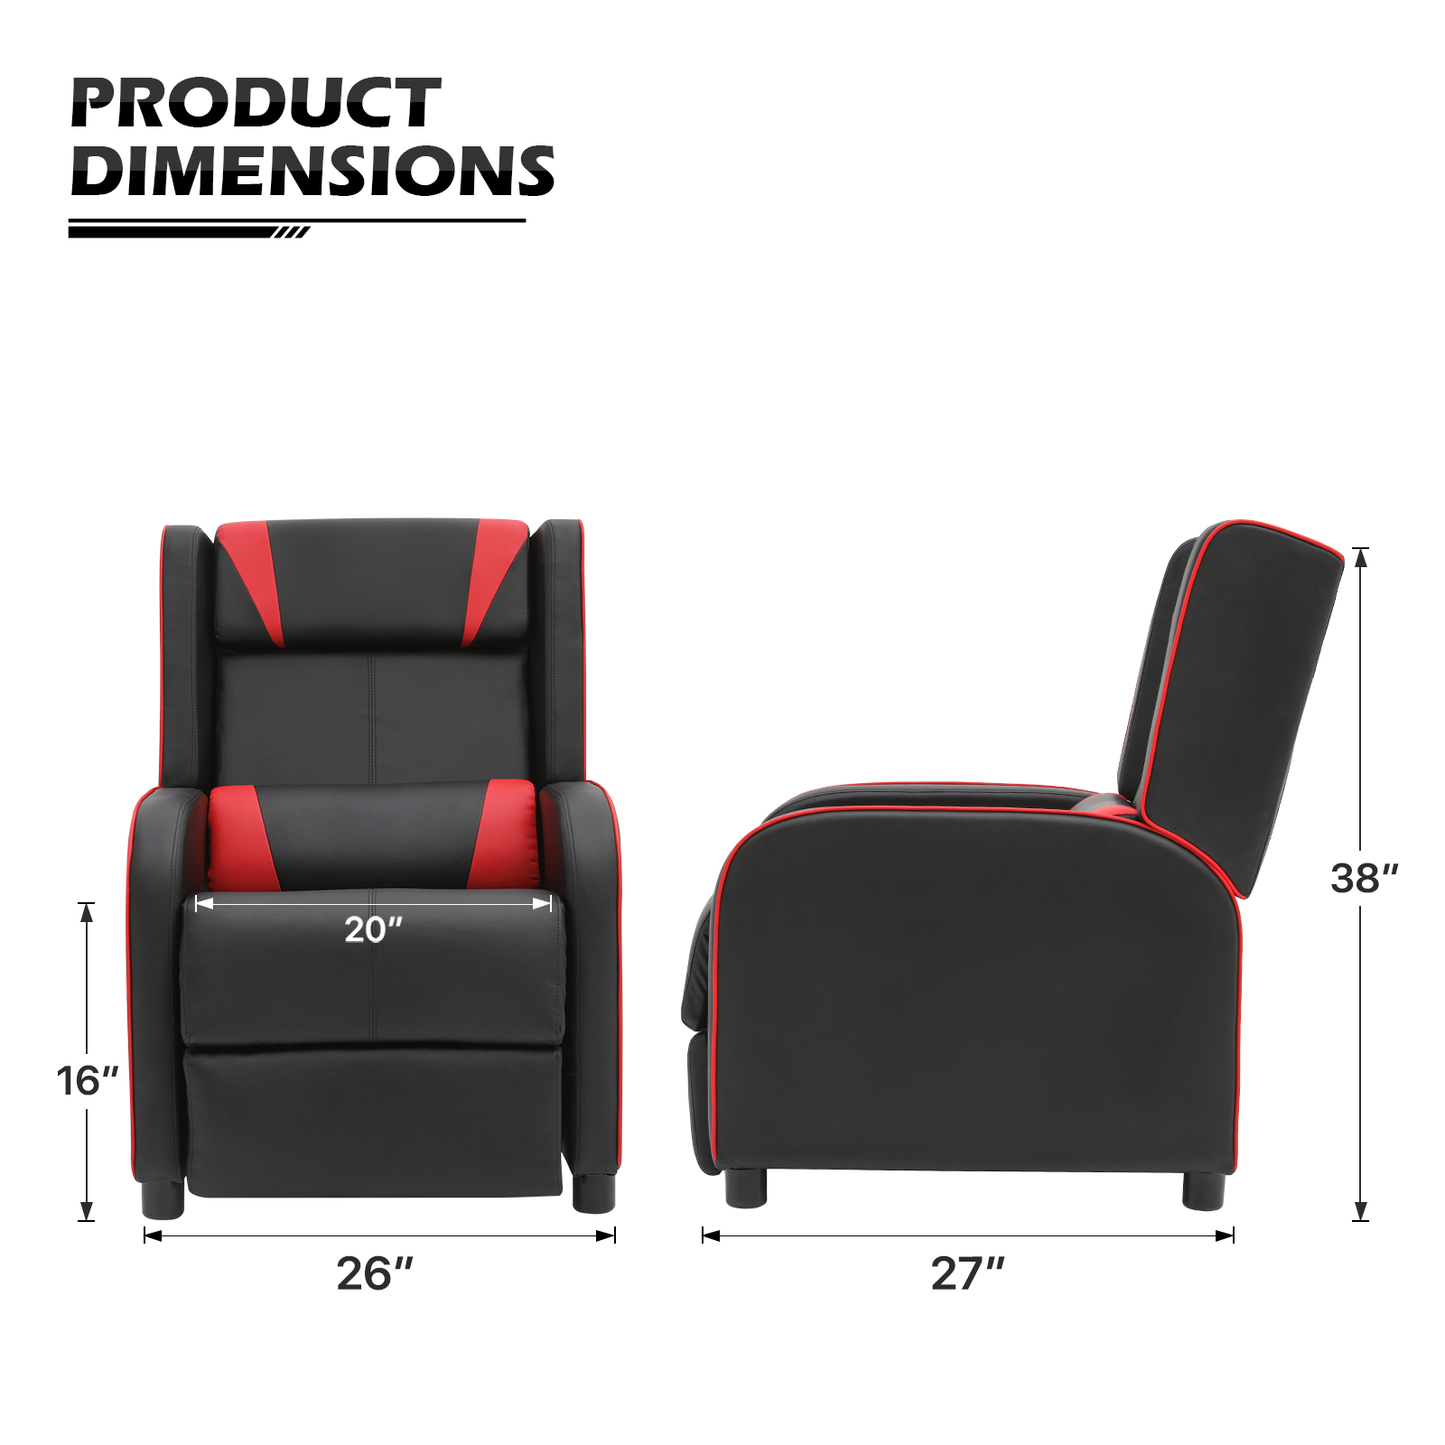 Massage Single Sofa - Reclinable Gaming Chair - PU Leather Seat